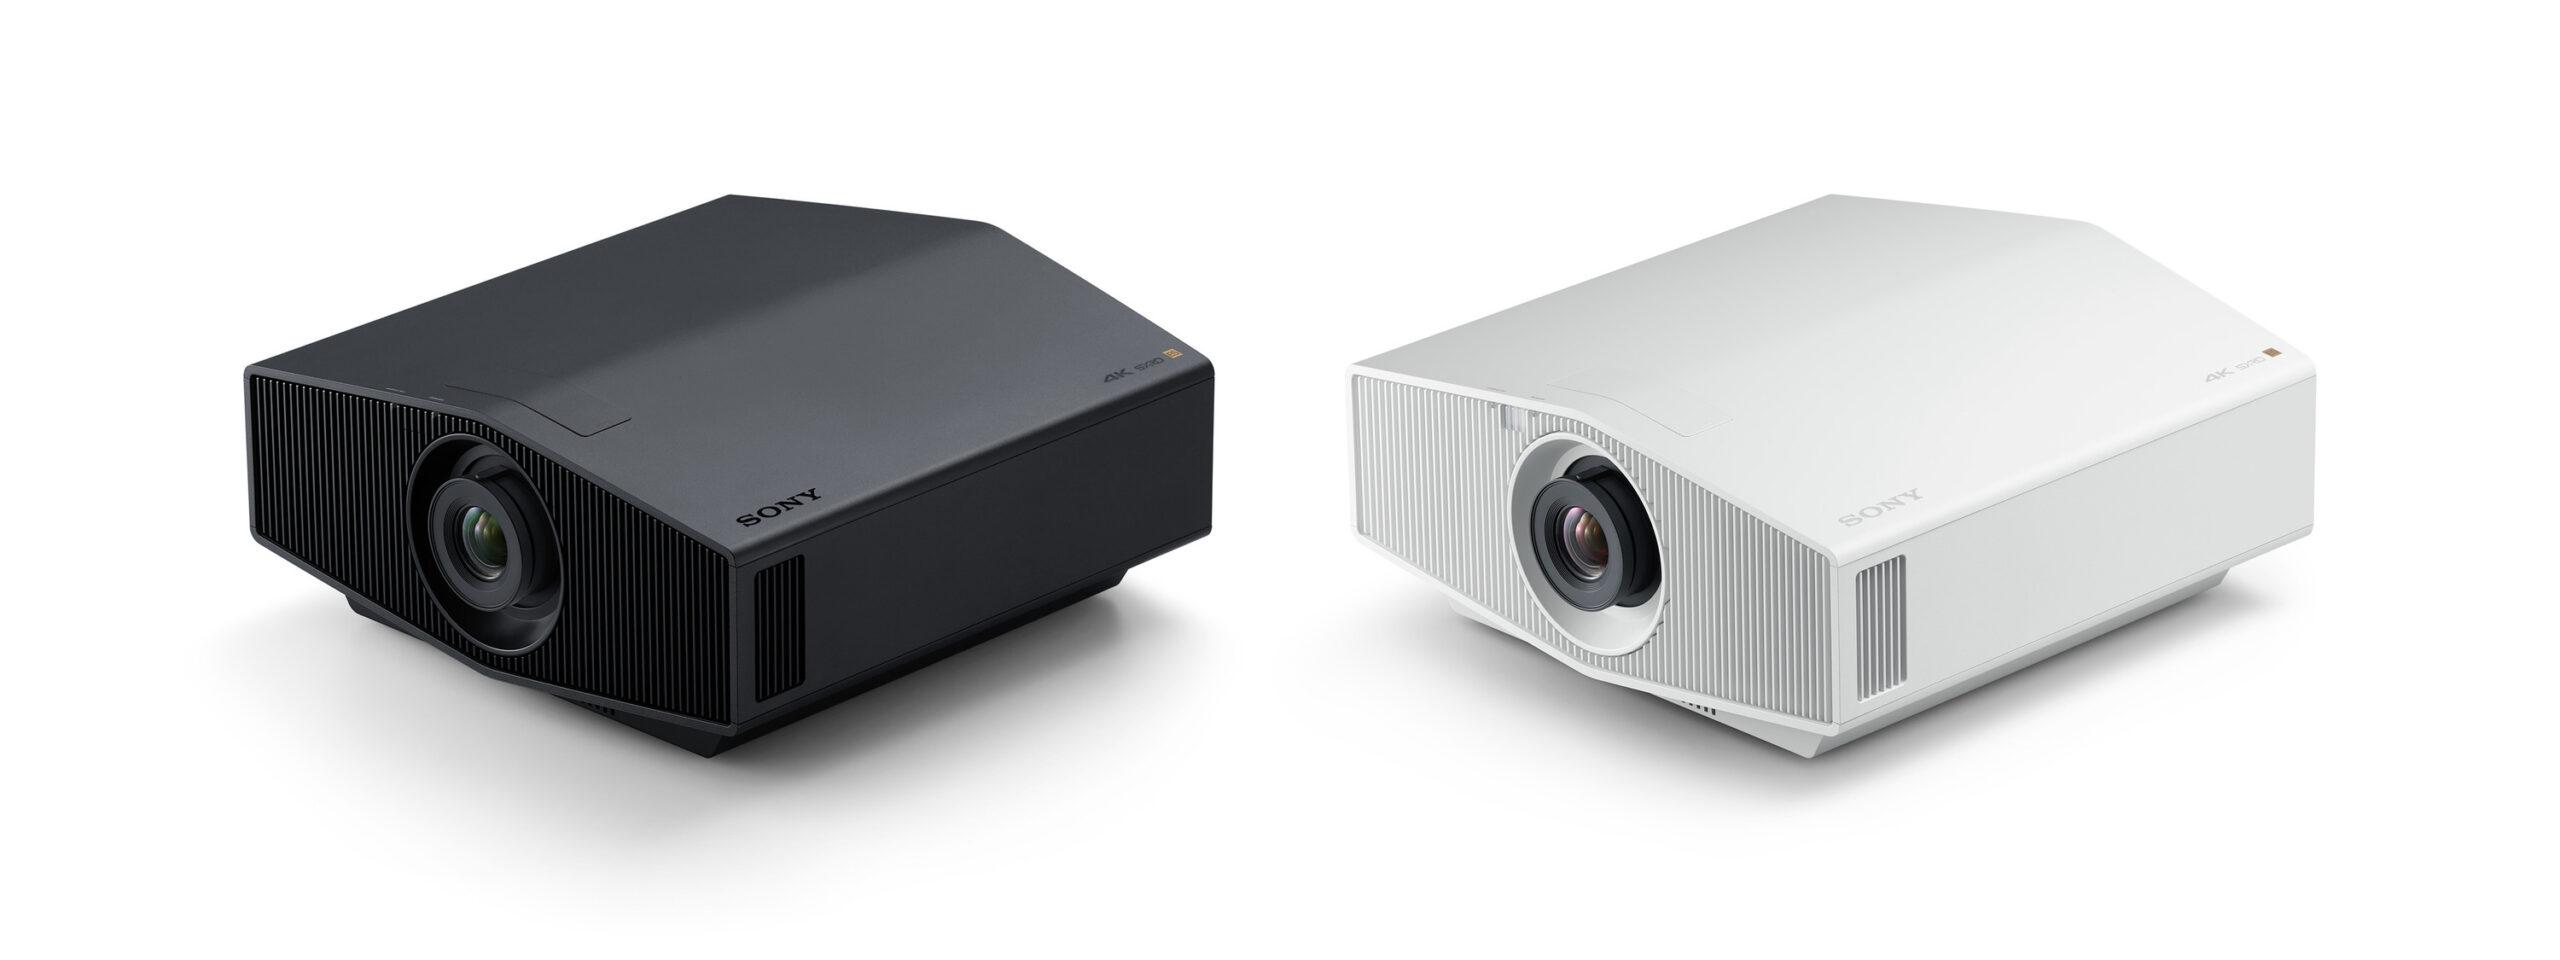 This is no mere annual refresh. Sony's three new home theater projectors are a generational leap forward. f458a9fc vplxw5000 others 220201 015 large scaled